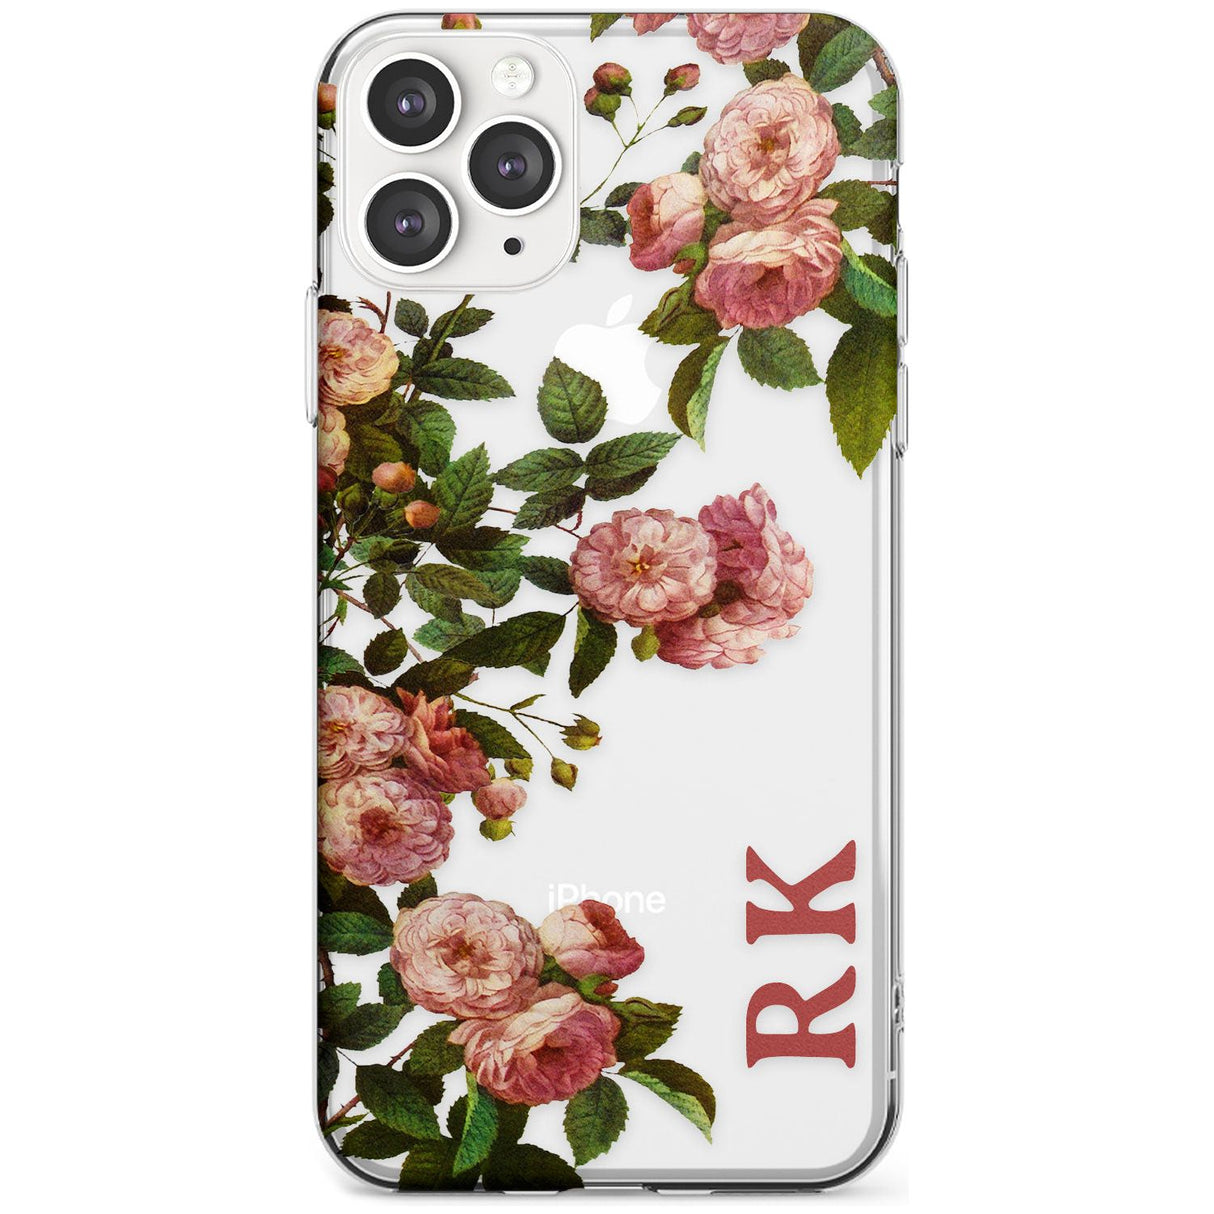 Custom Clear Vintage Floral Pink Garden Roses Slim TPU Phone Case for iPhone 11 Pro Max